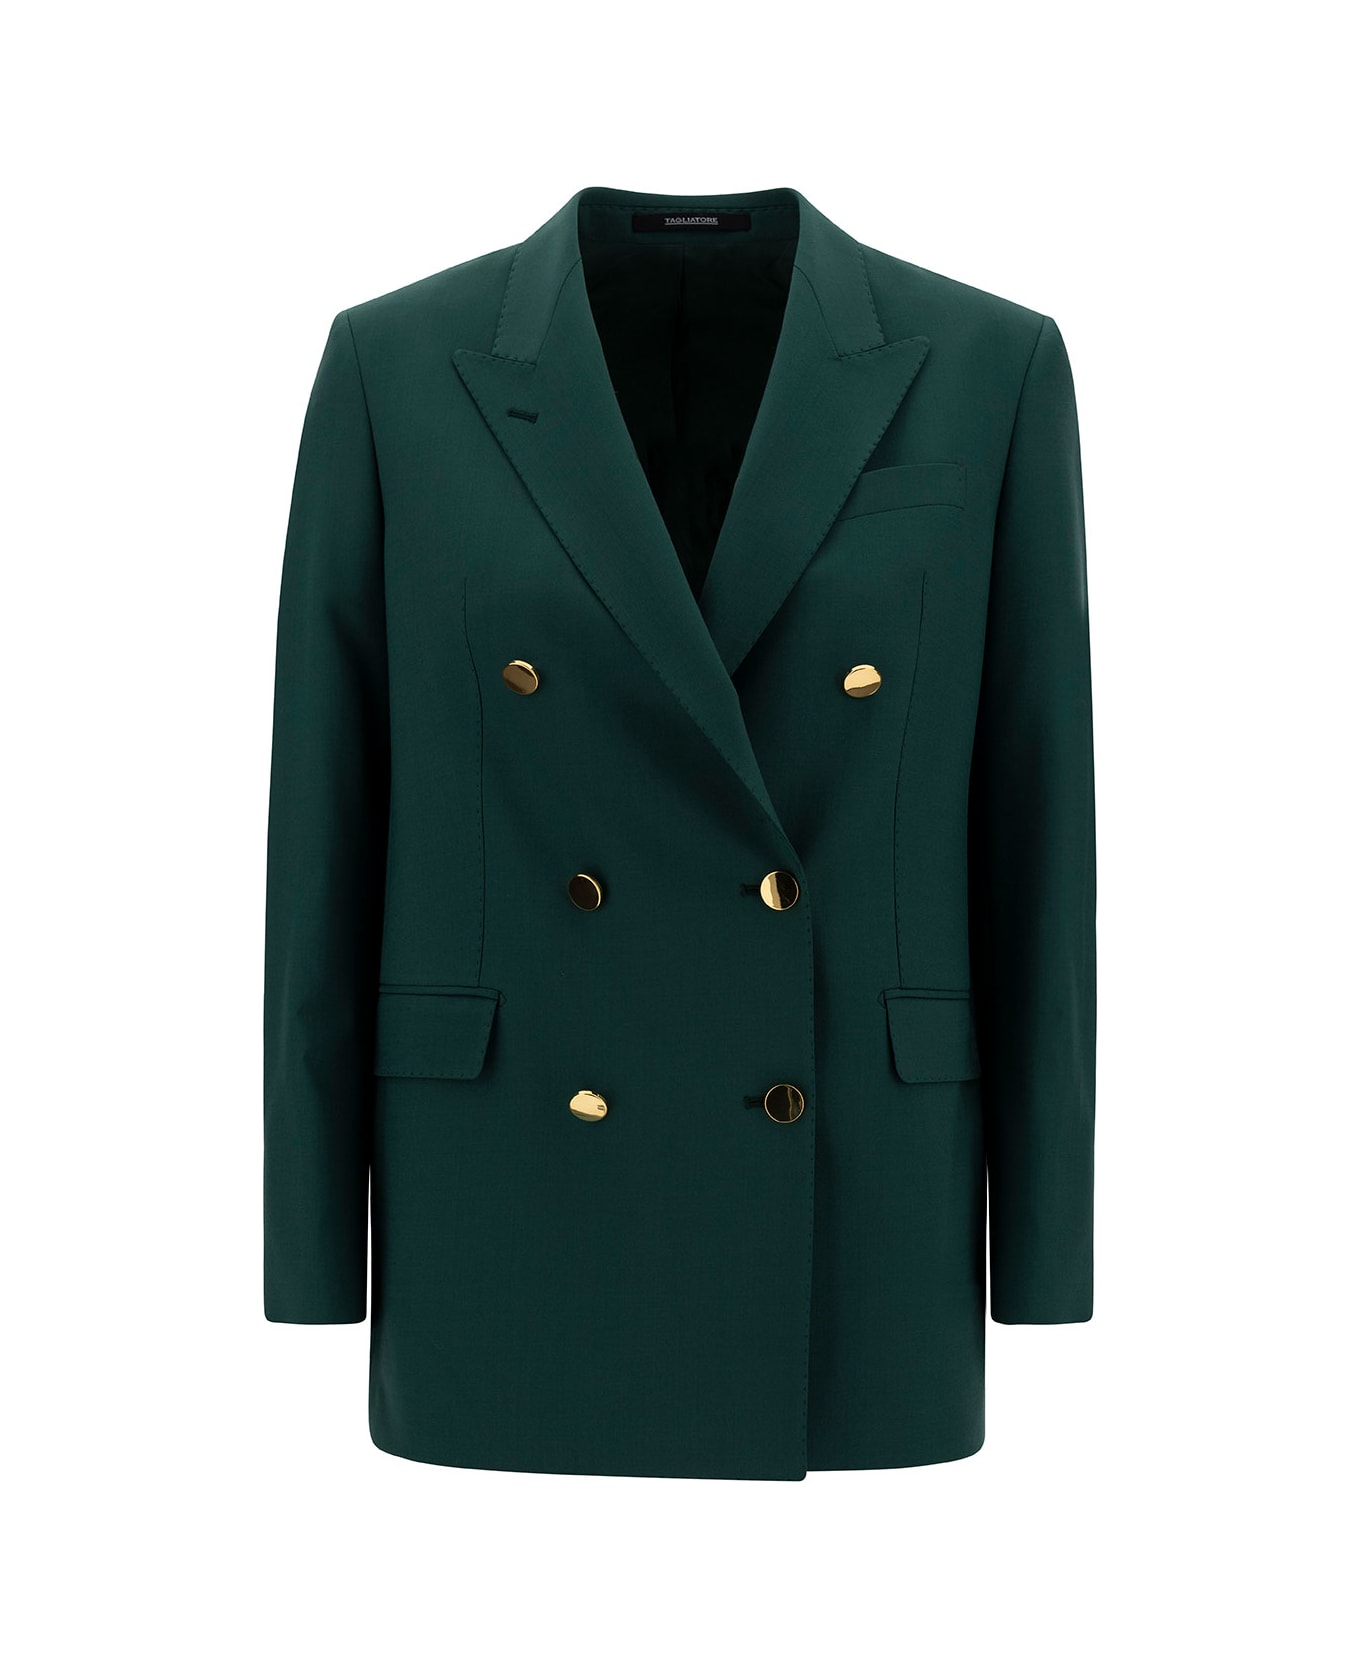 Tagliatore 'jasmine' Green Double-breasted Jacket With Golden Buttons In Stretch Wool Blend Woman - Green